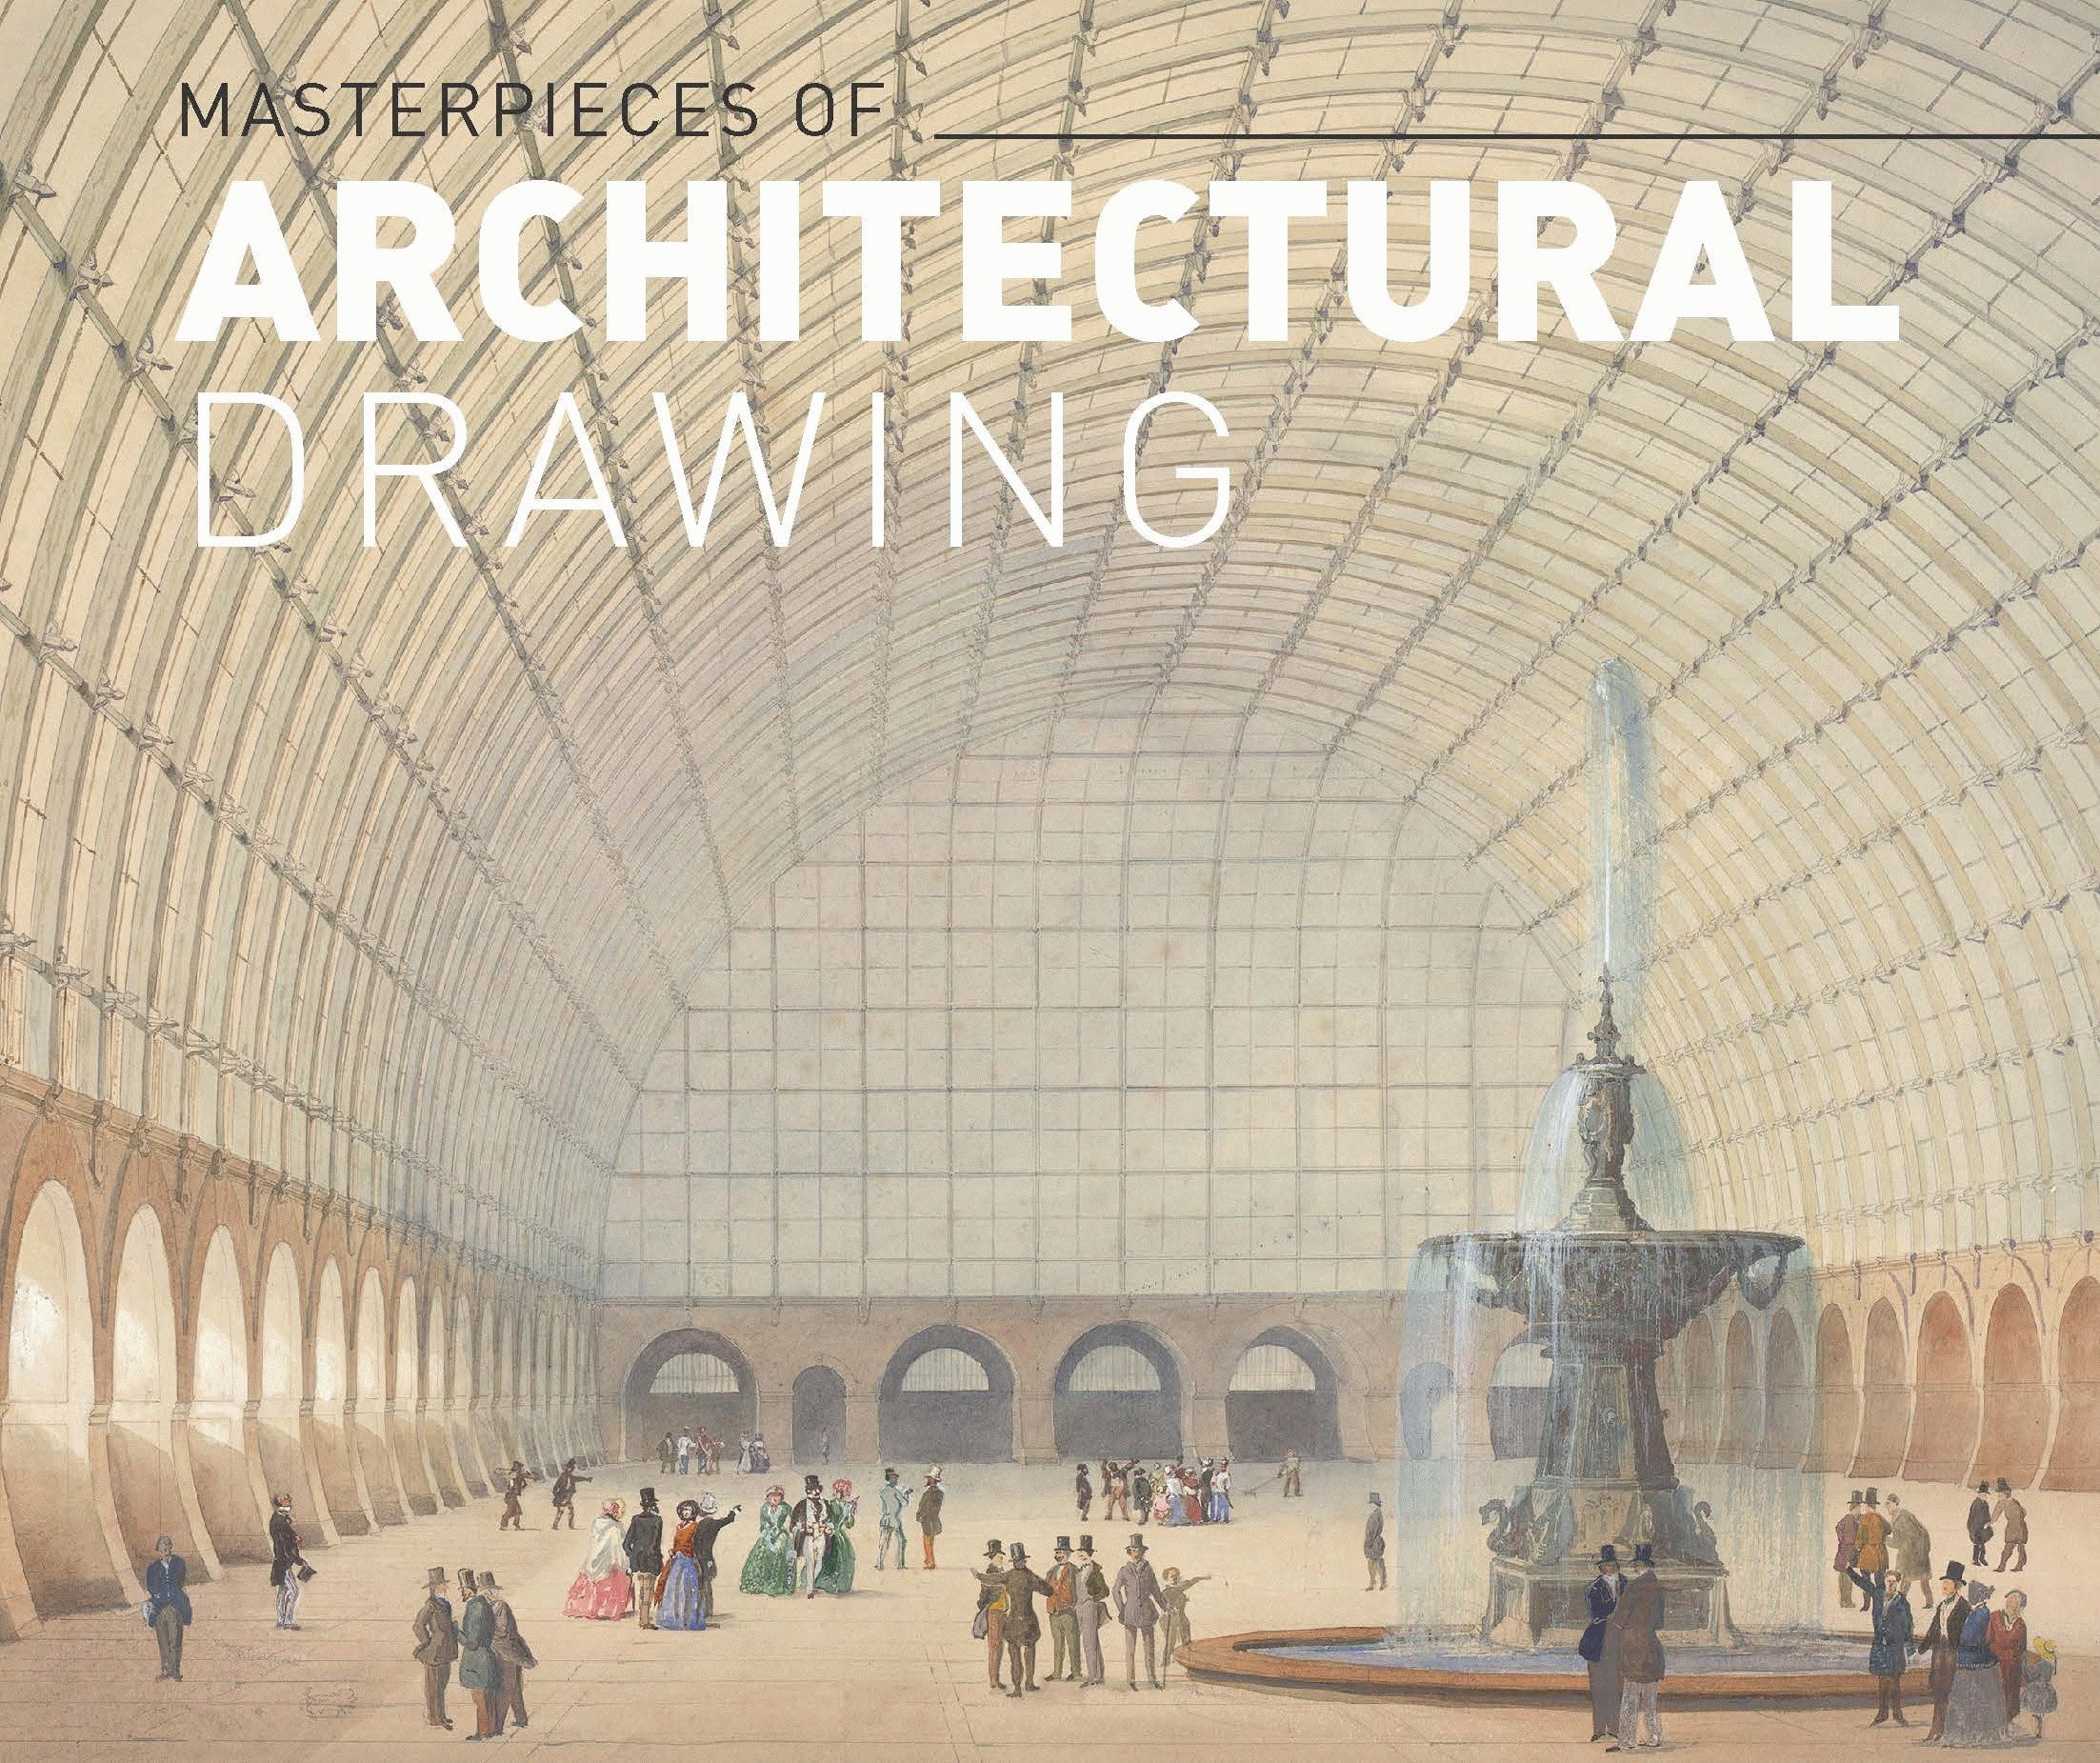 Masterpieces of Architectural Drawing from Alberitna